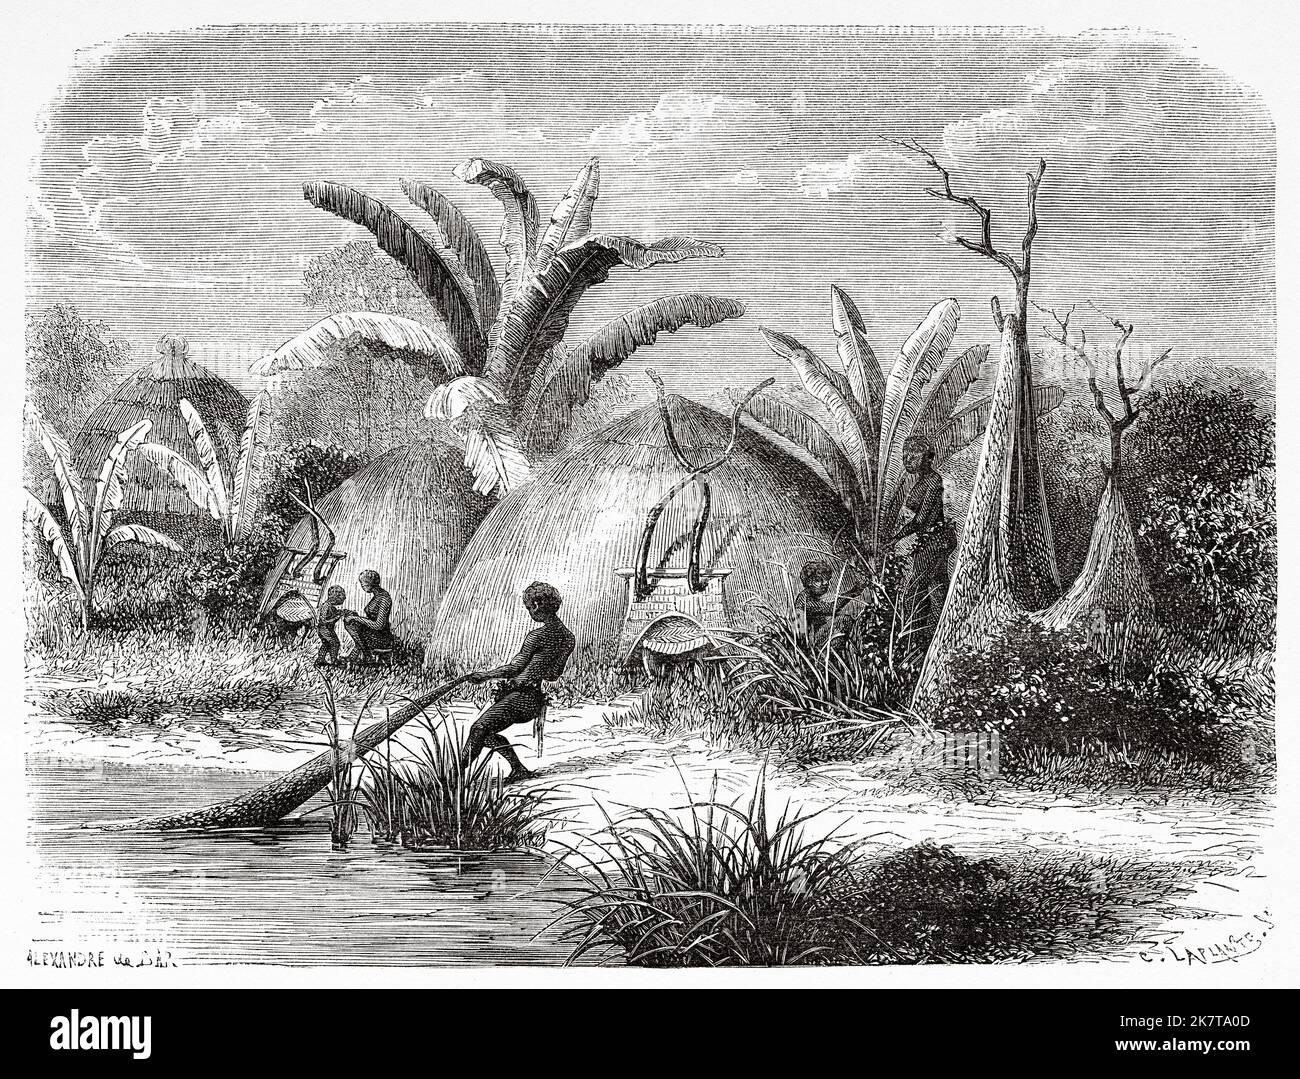 Huts in a Kredi village, Democratic Republic of the Congo. Africa. Heart of Africa Three years travels and adventures in the unexplored regions of Central Africa by Georg August Schweinfurth, 1868-1871 Stock Photo